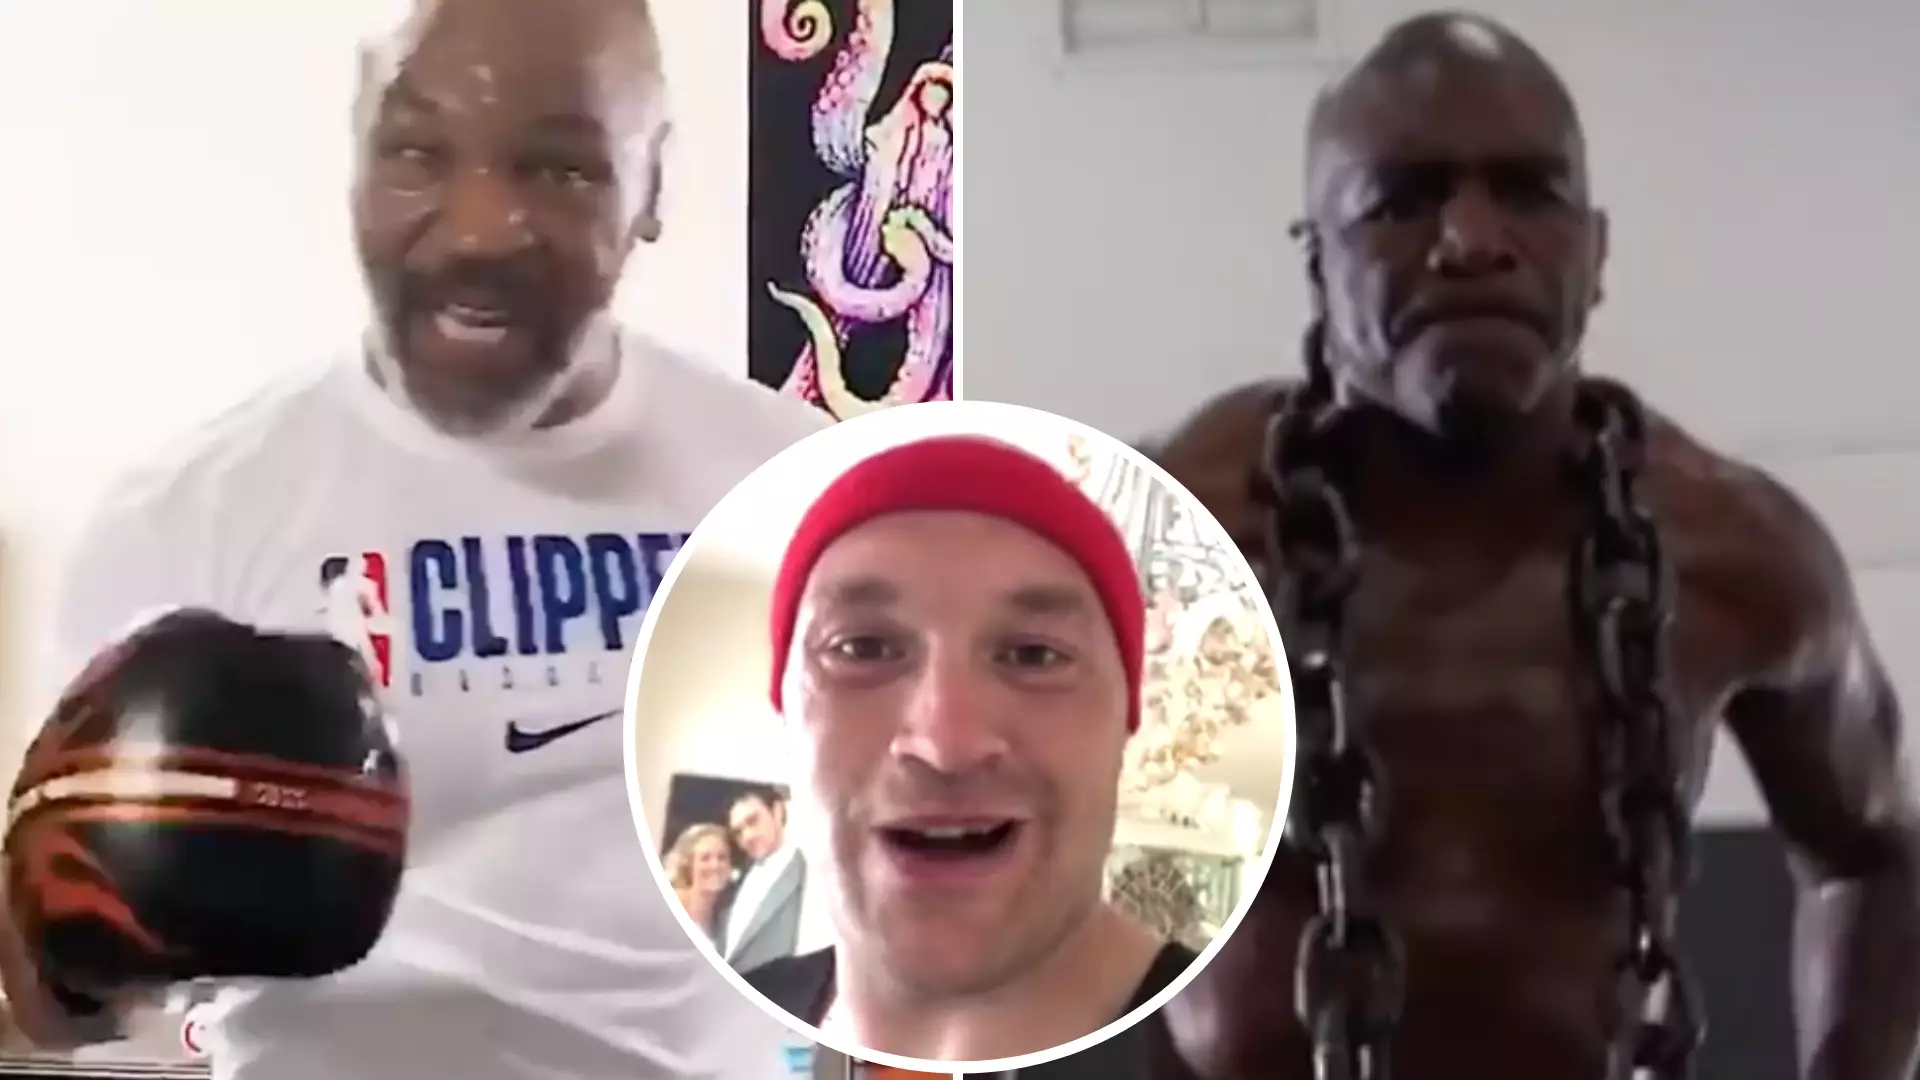 Tyson Fury Reacts To Mike Tyson’s Comeback And Completing Trilogy Fight With Evander Holyfield